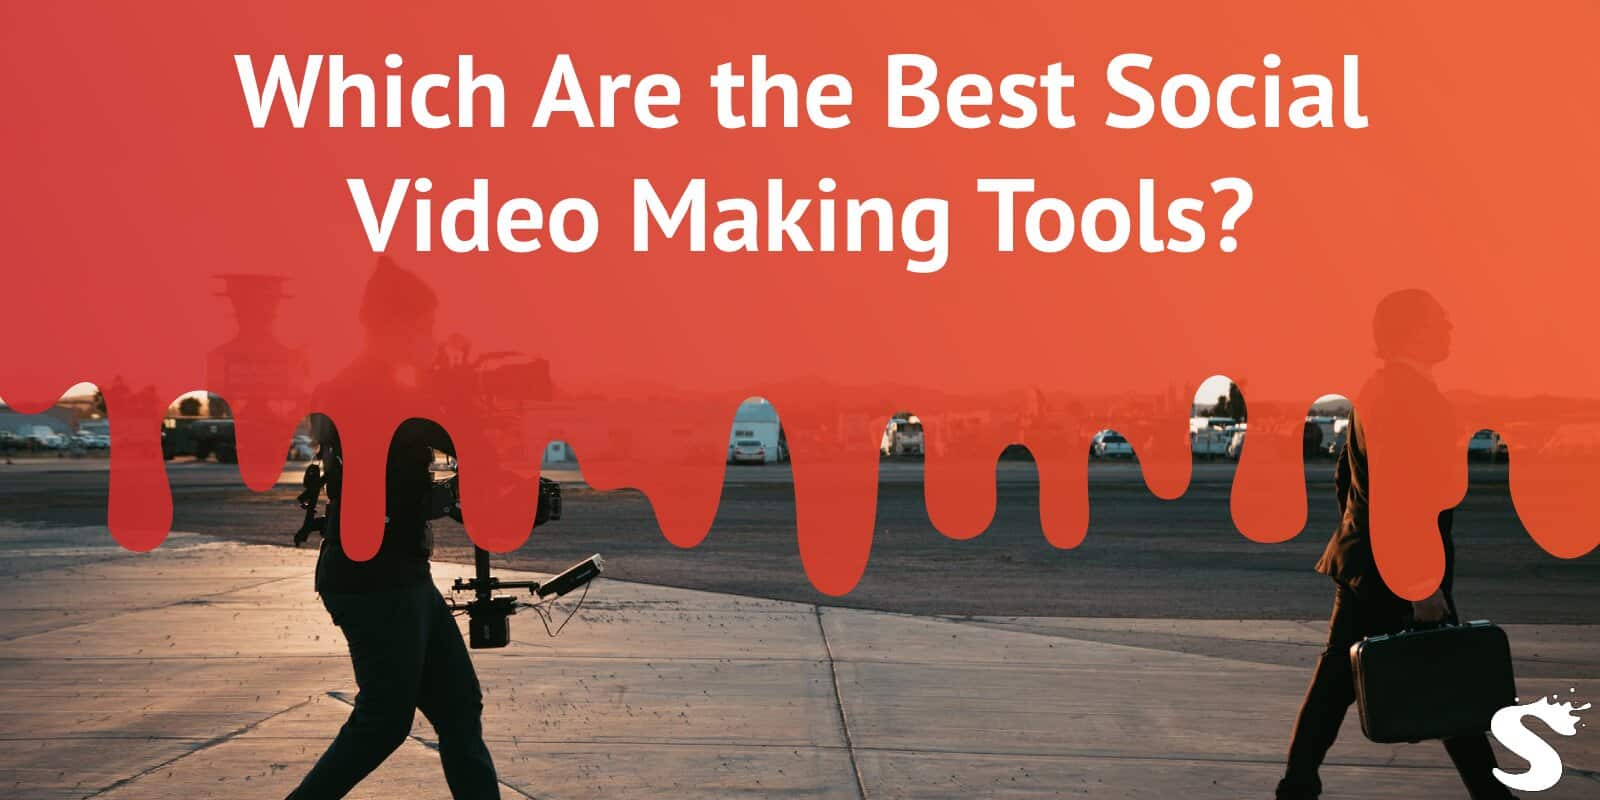 Which Are the Best Social Video Making Tools?